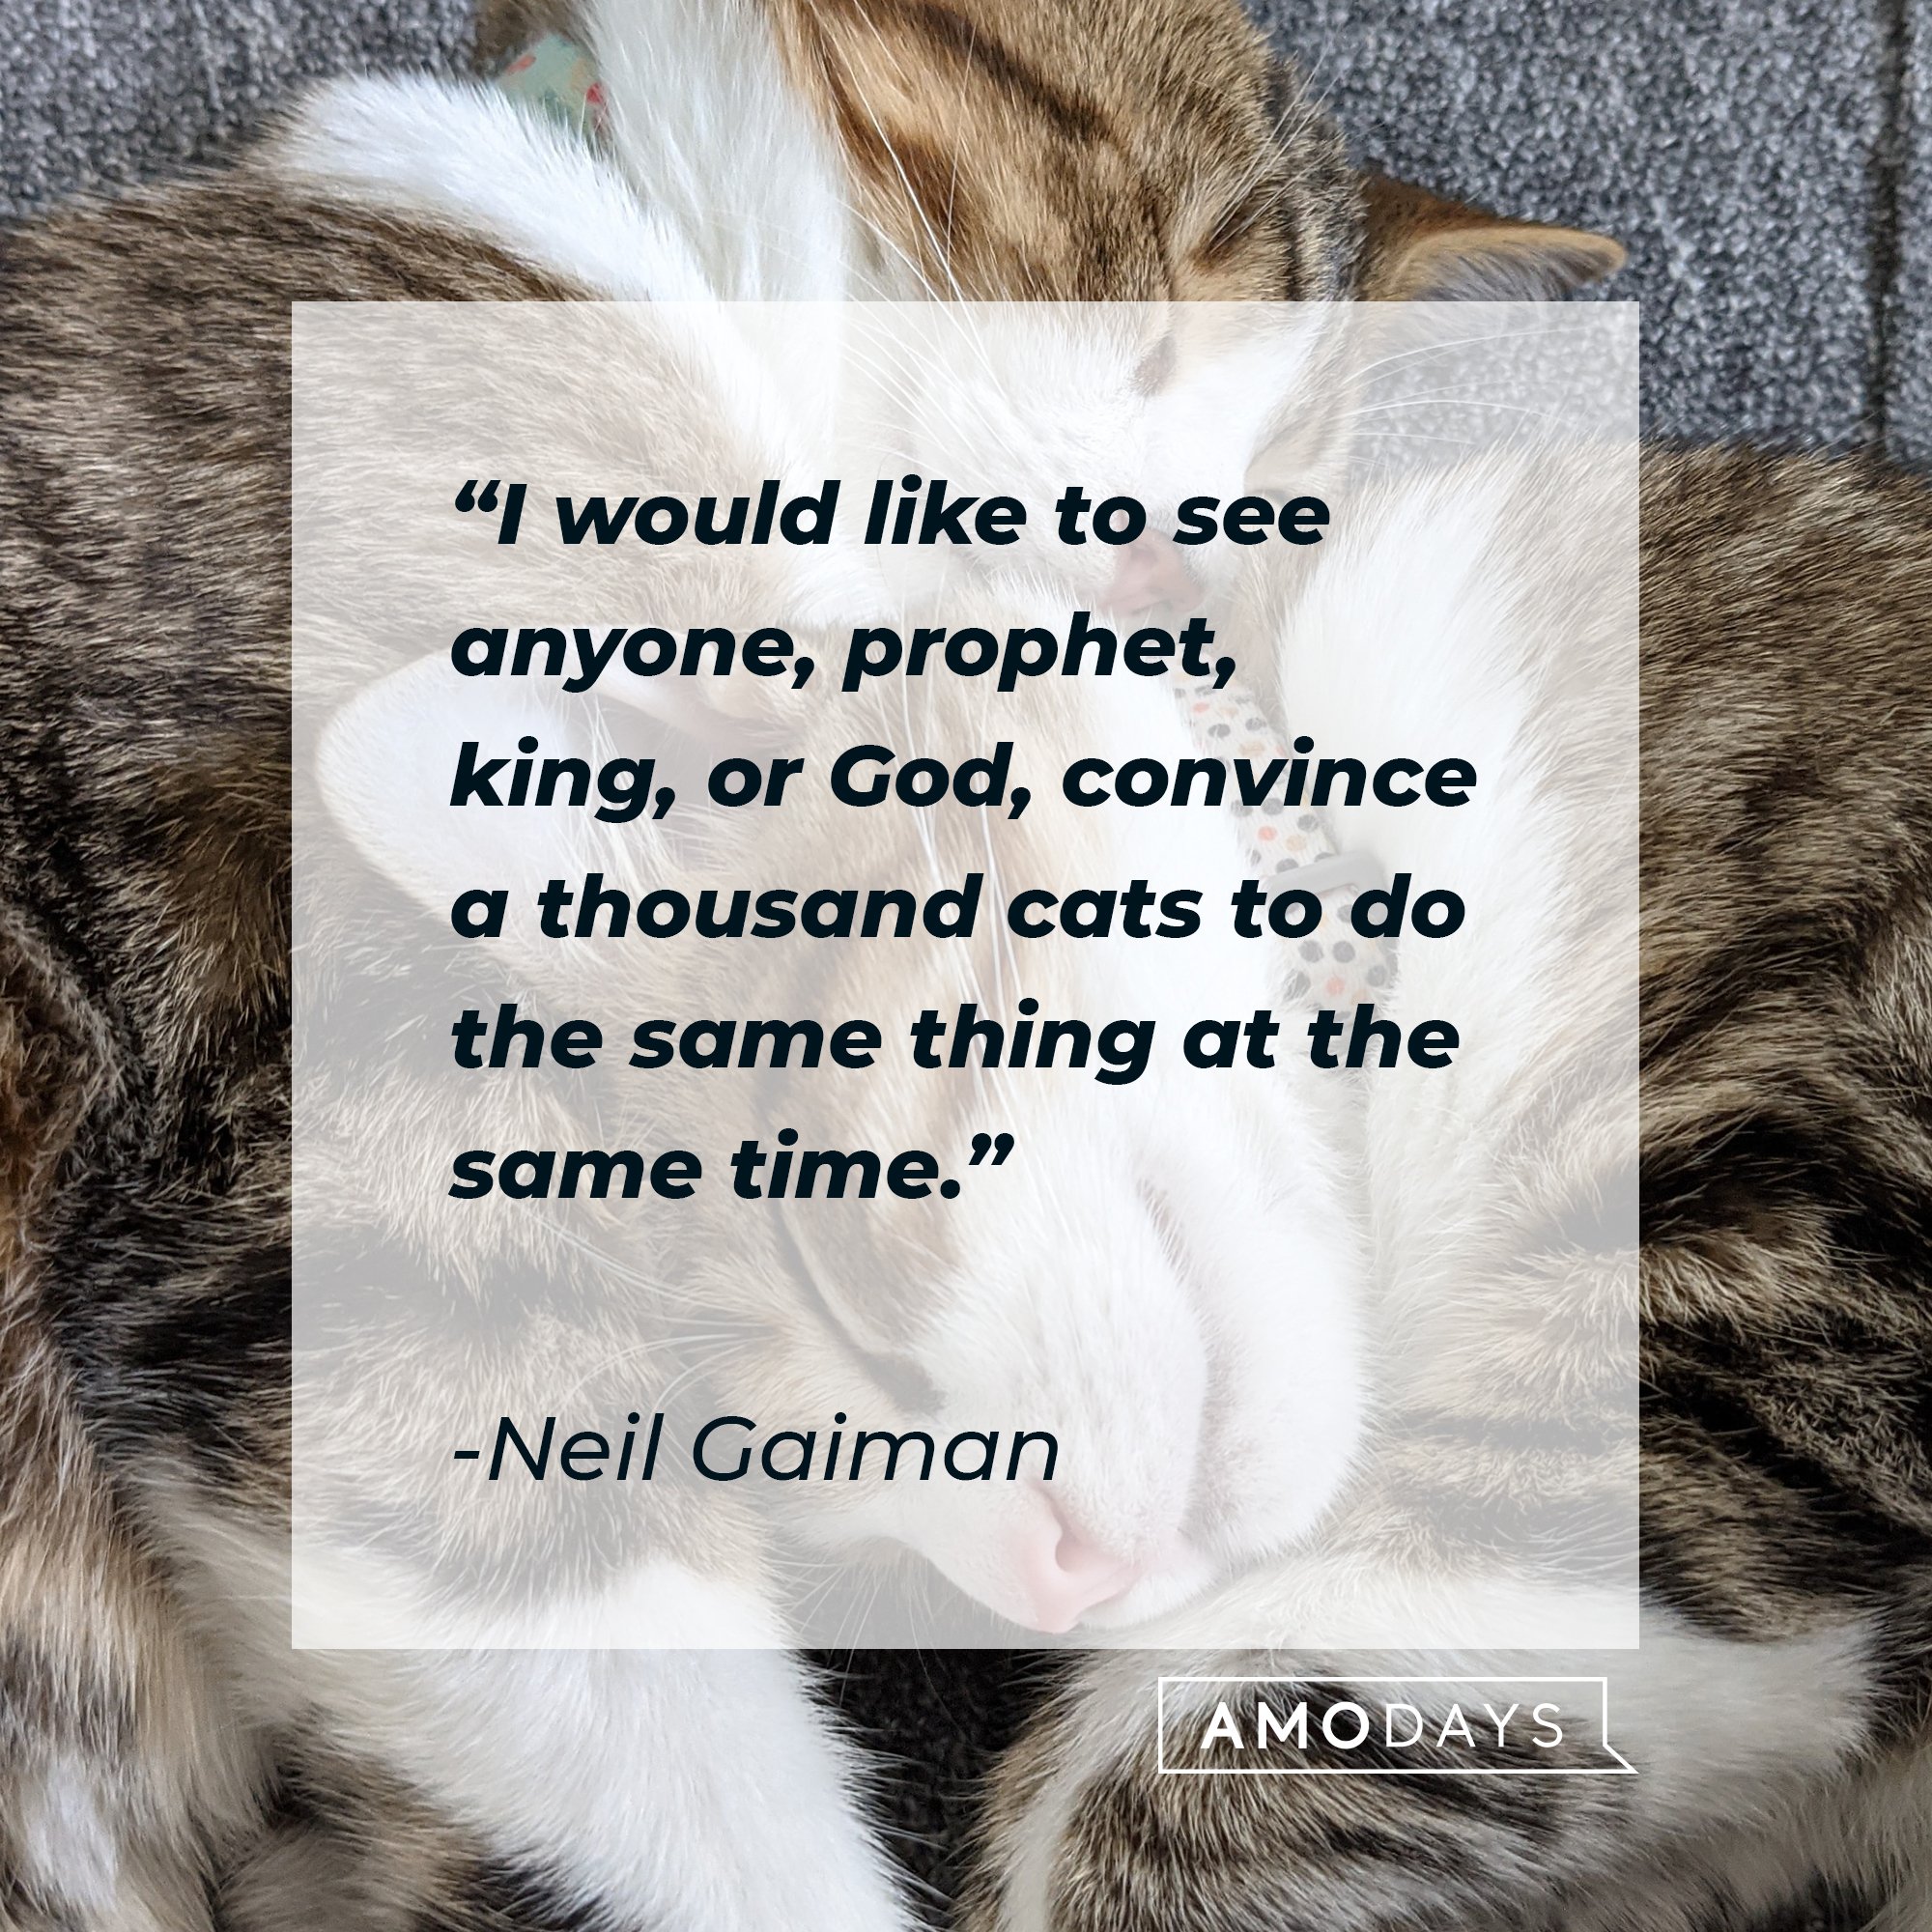  Neil Gaiman's quote: "I would like to see anyone, prophet, king, or God, convince a thousand cats to do the same thing at the same time." | Image: AmoDays